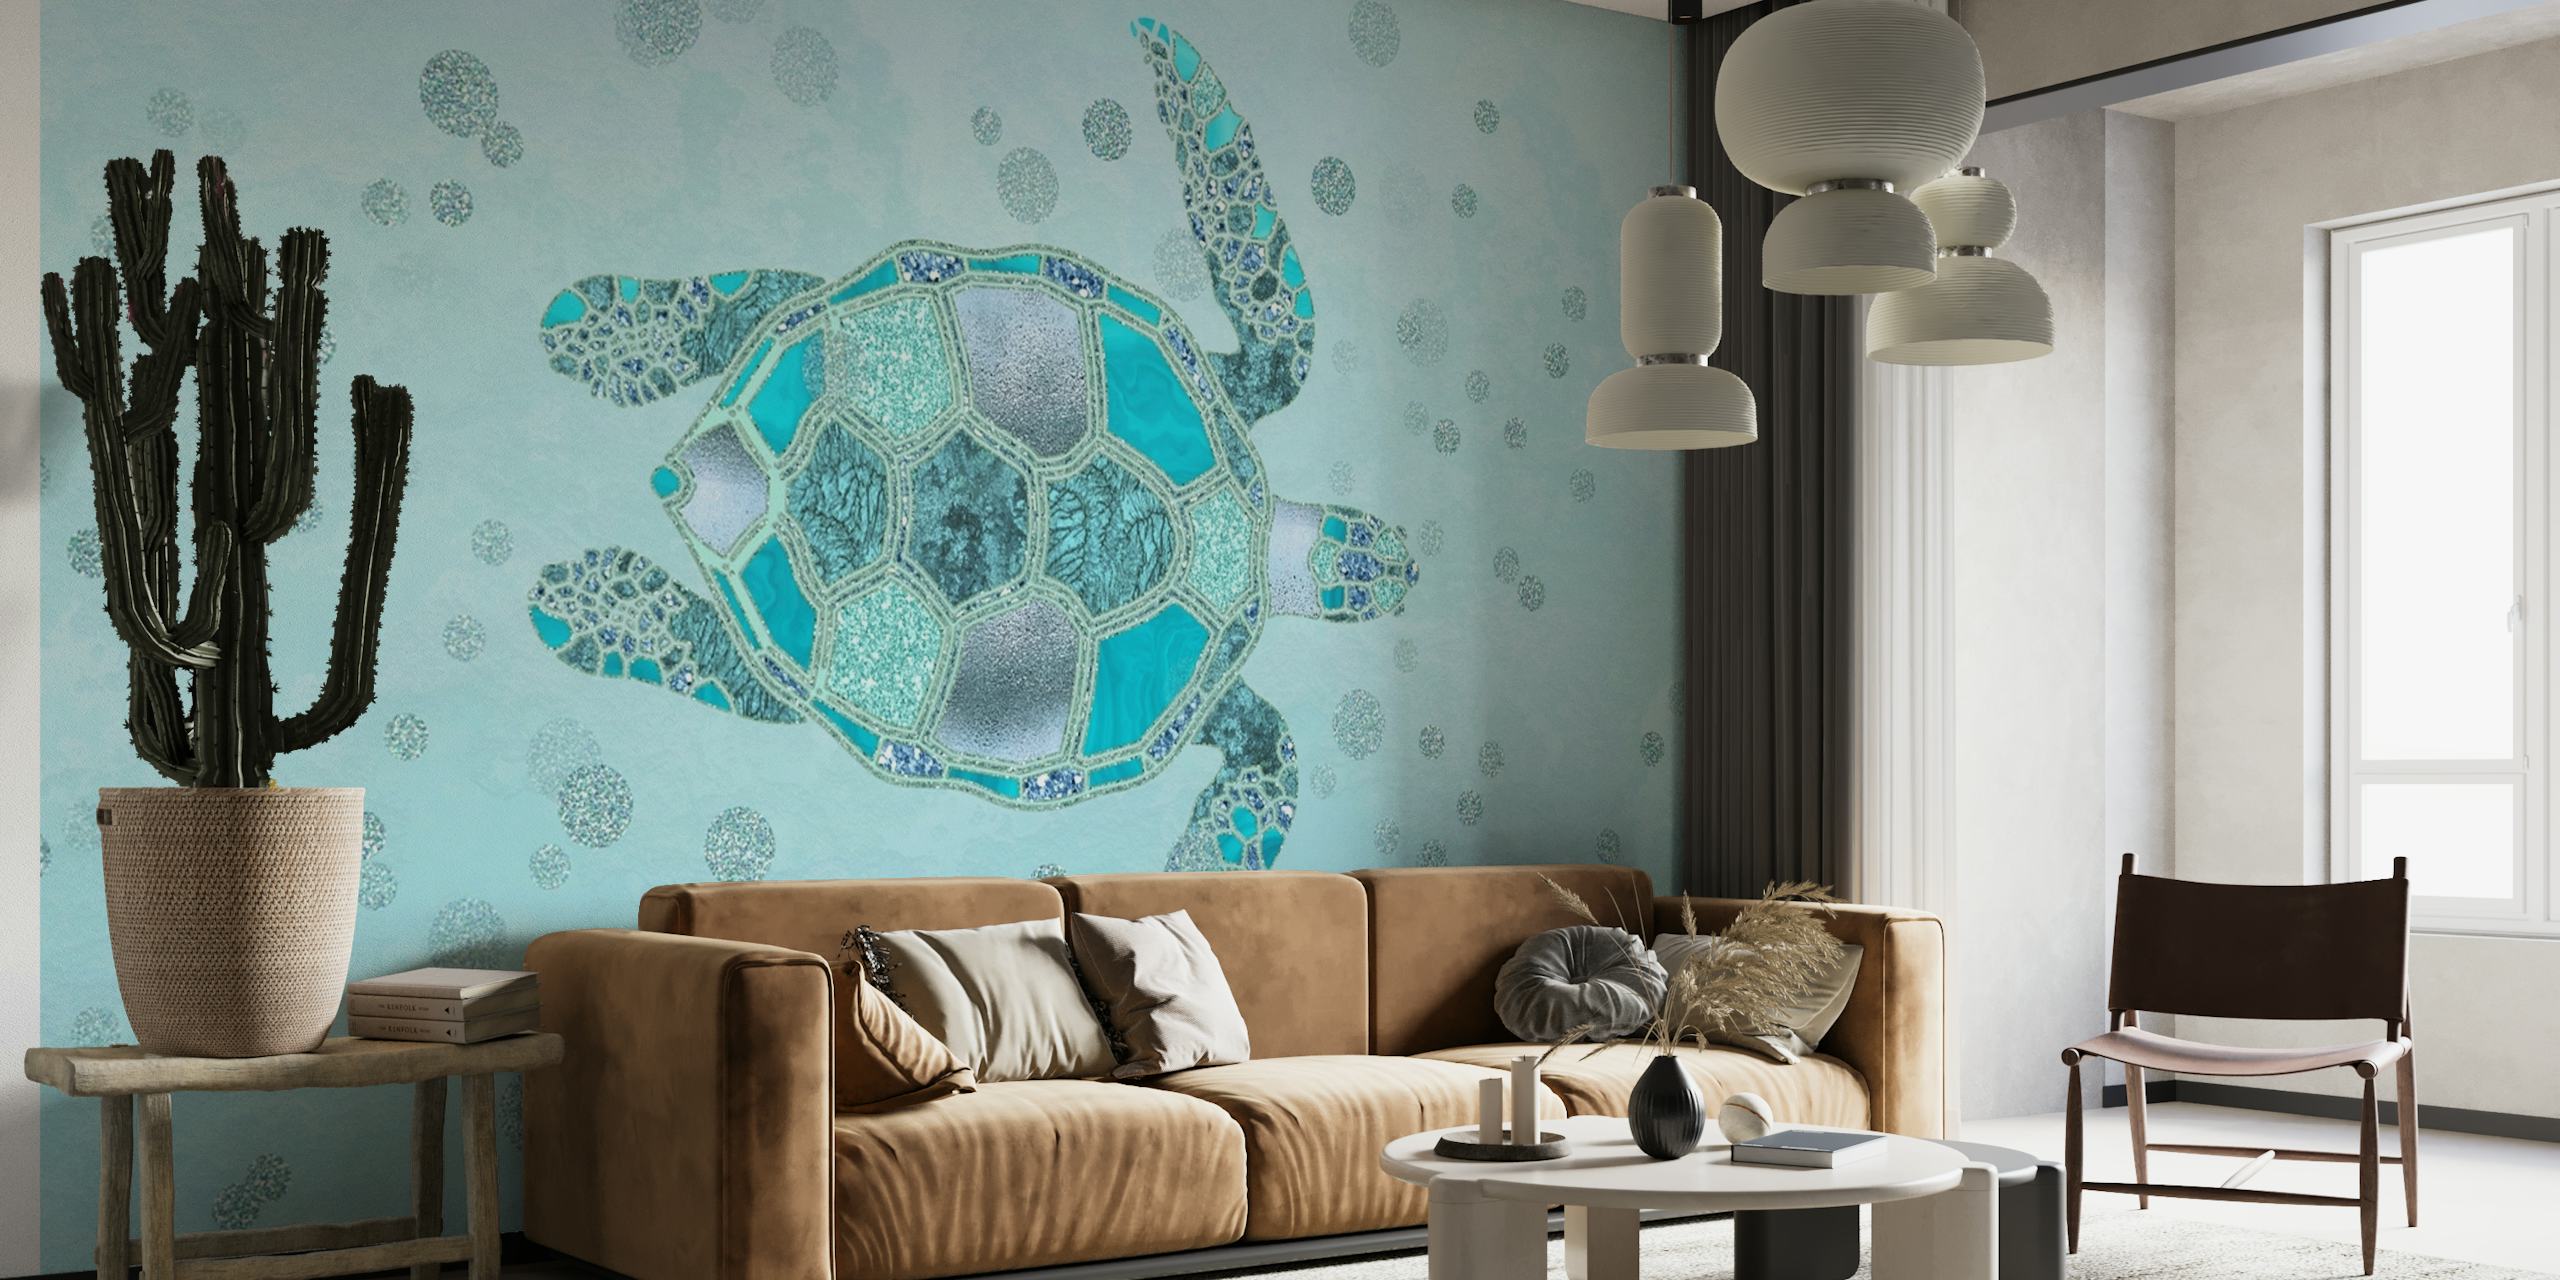 Wall mural of a turquoise turtle swimming in aqua-colored waters.